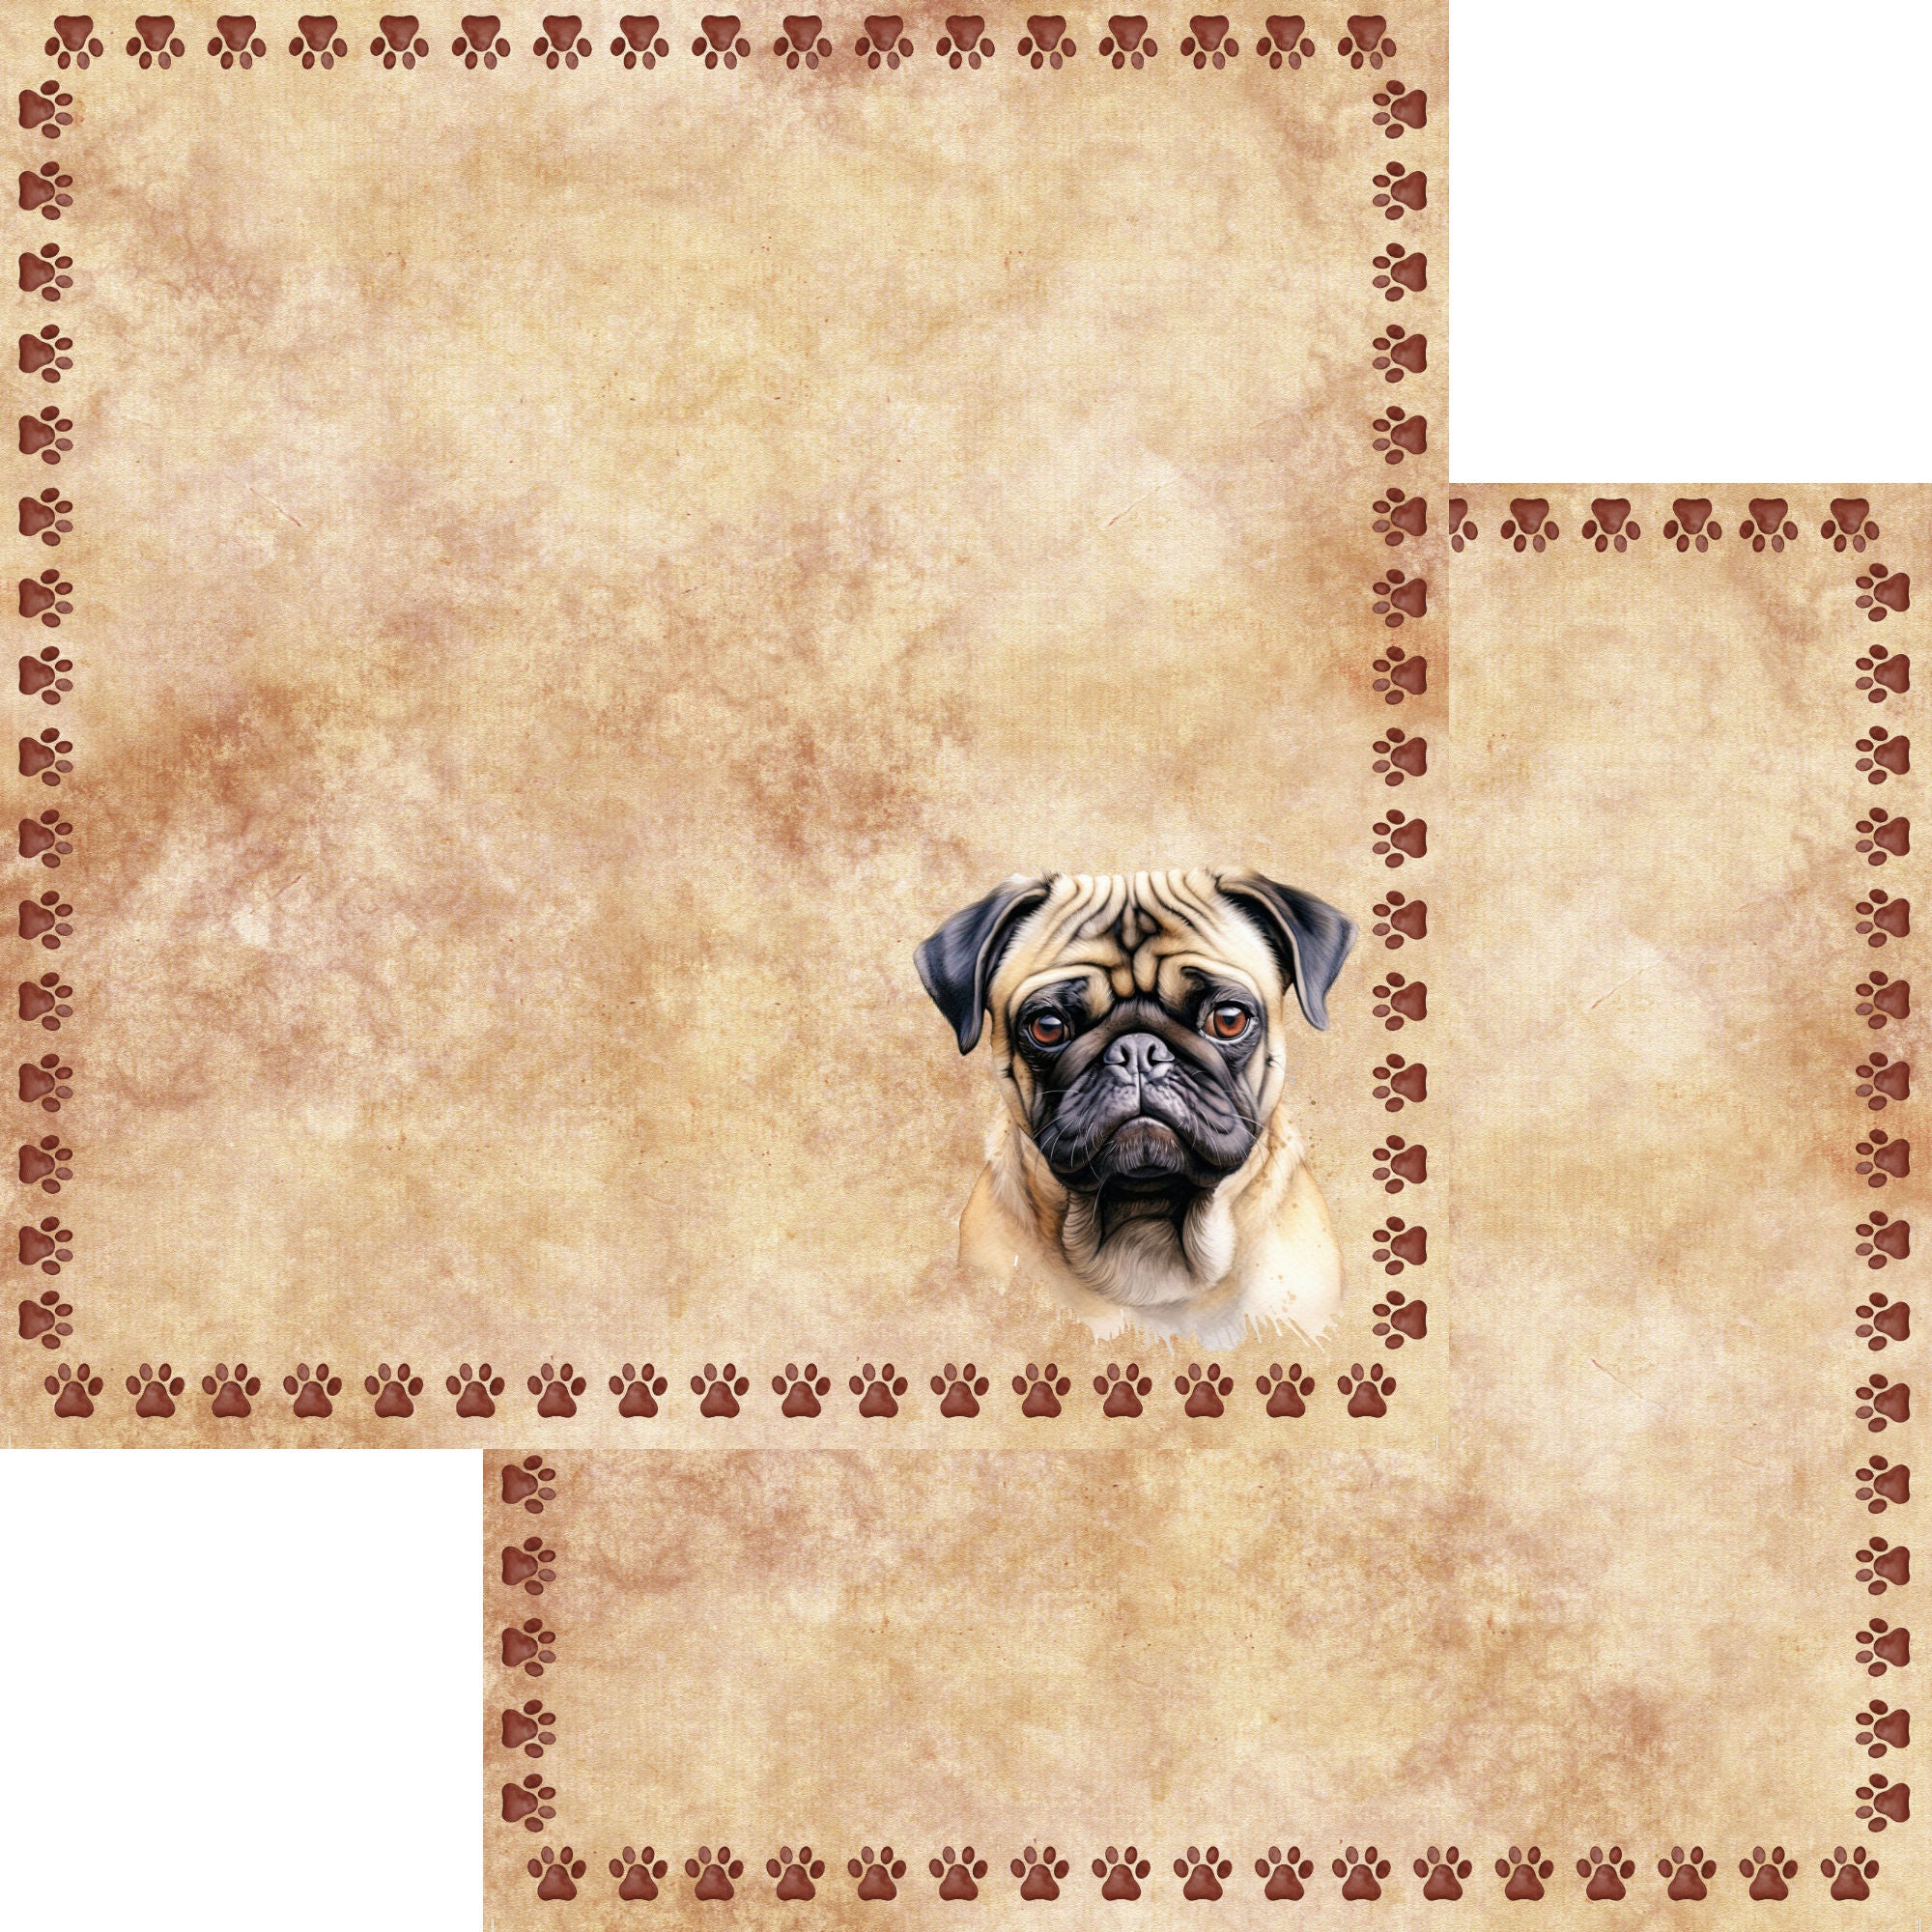 Dog Breeds Collection Pug 12 x 12 Double-Sided Scrapbook Paper by SSC Designs